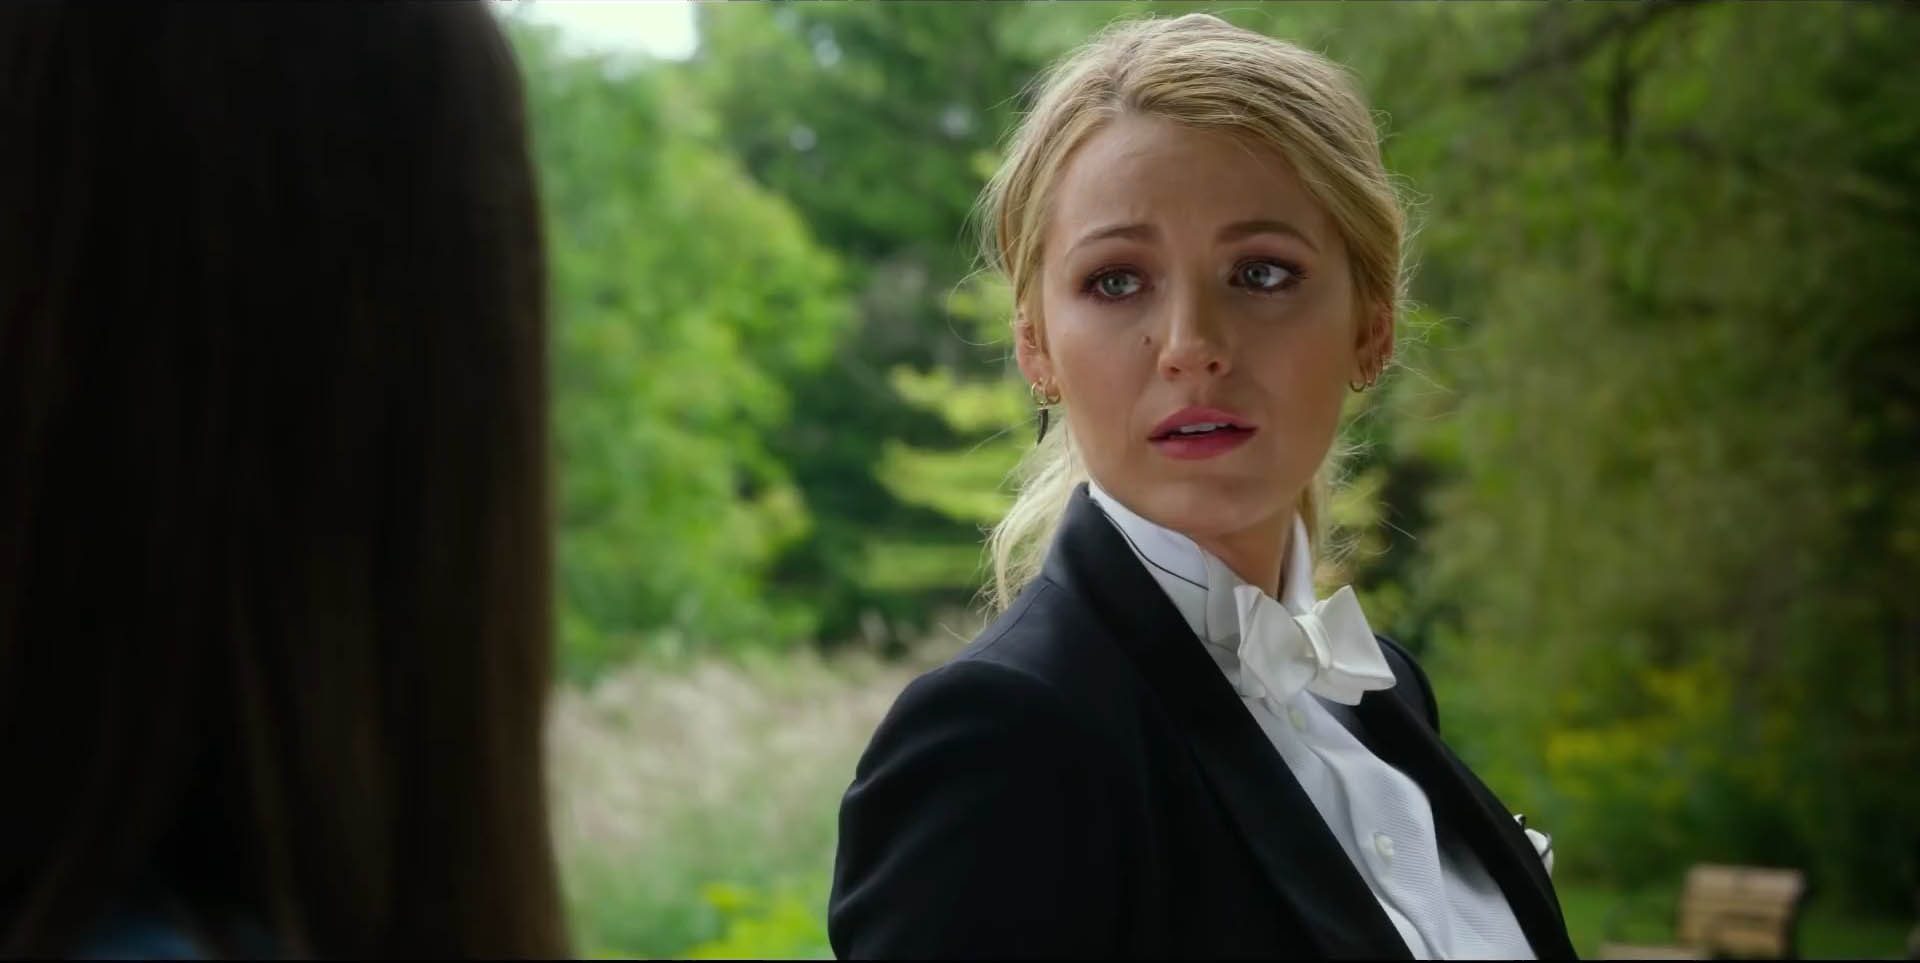 A Simple Favor Trailer - What Happened to Emily? | The Nerdy